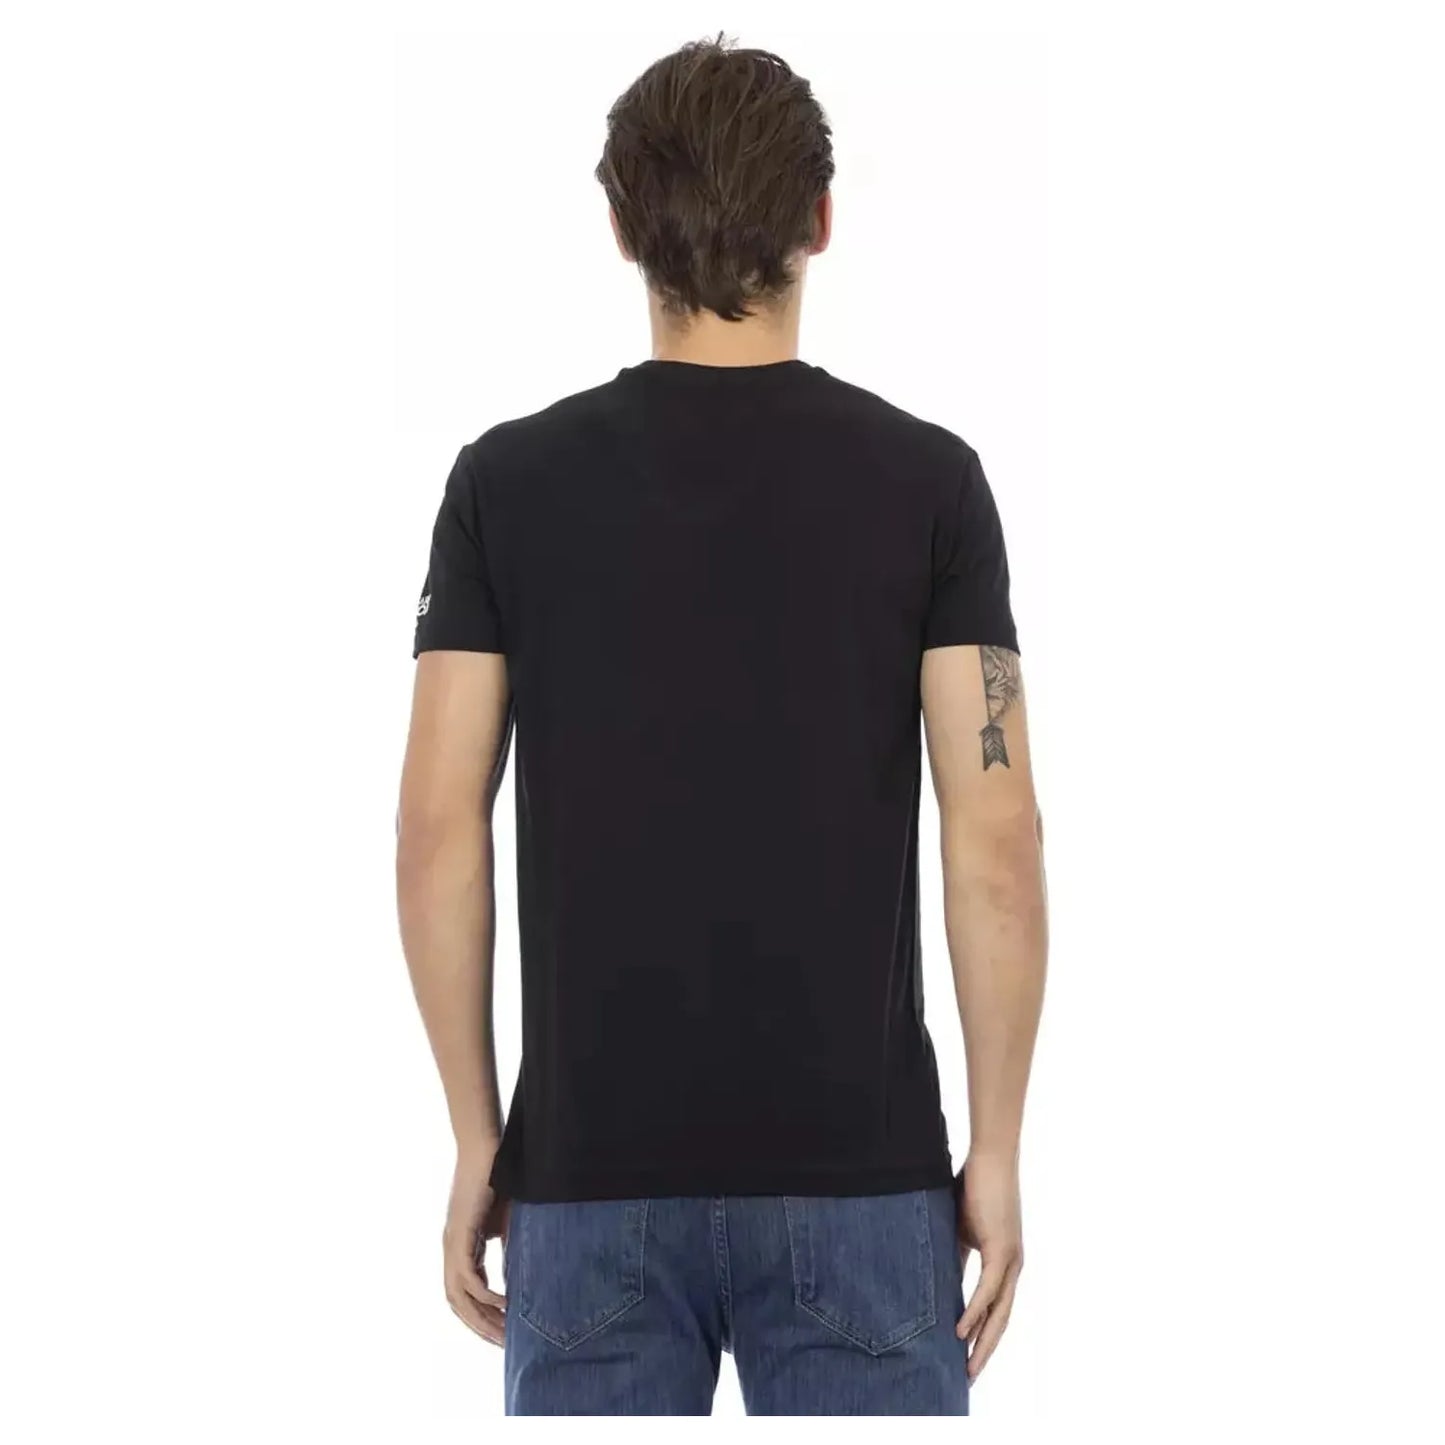 Trussardi Action Sleek V-Neck Tee with Edgy Front Print black-cotton-t-shirt-45